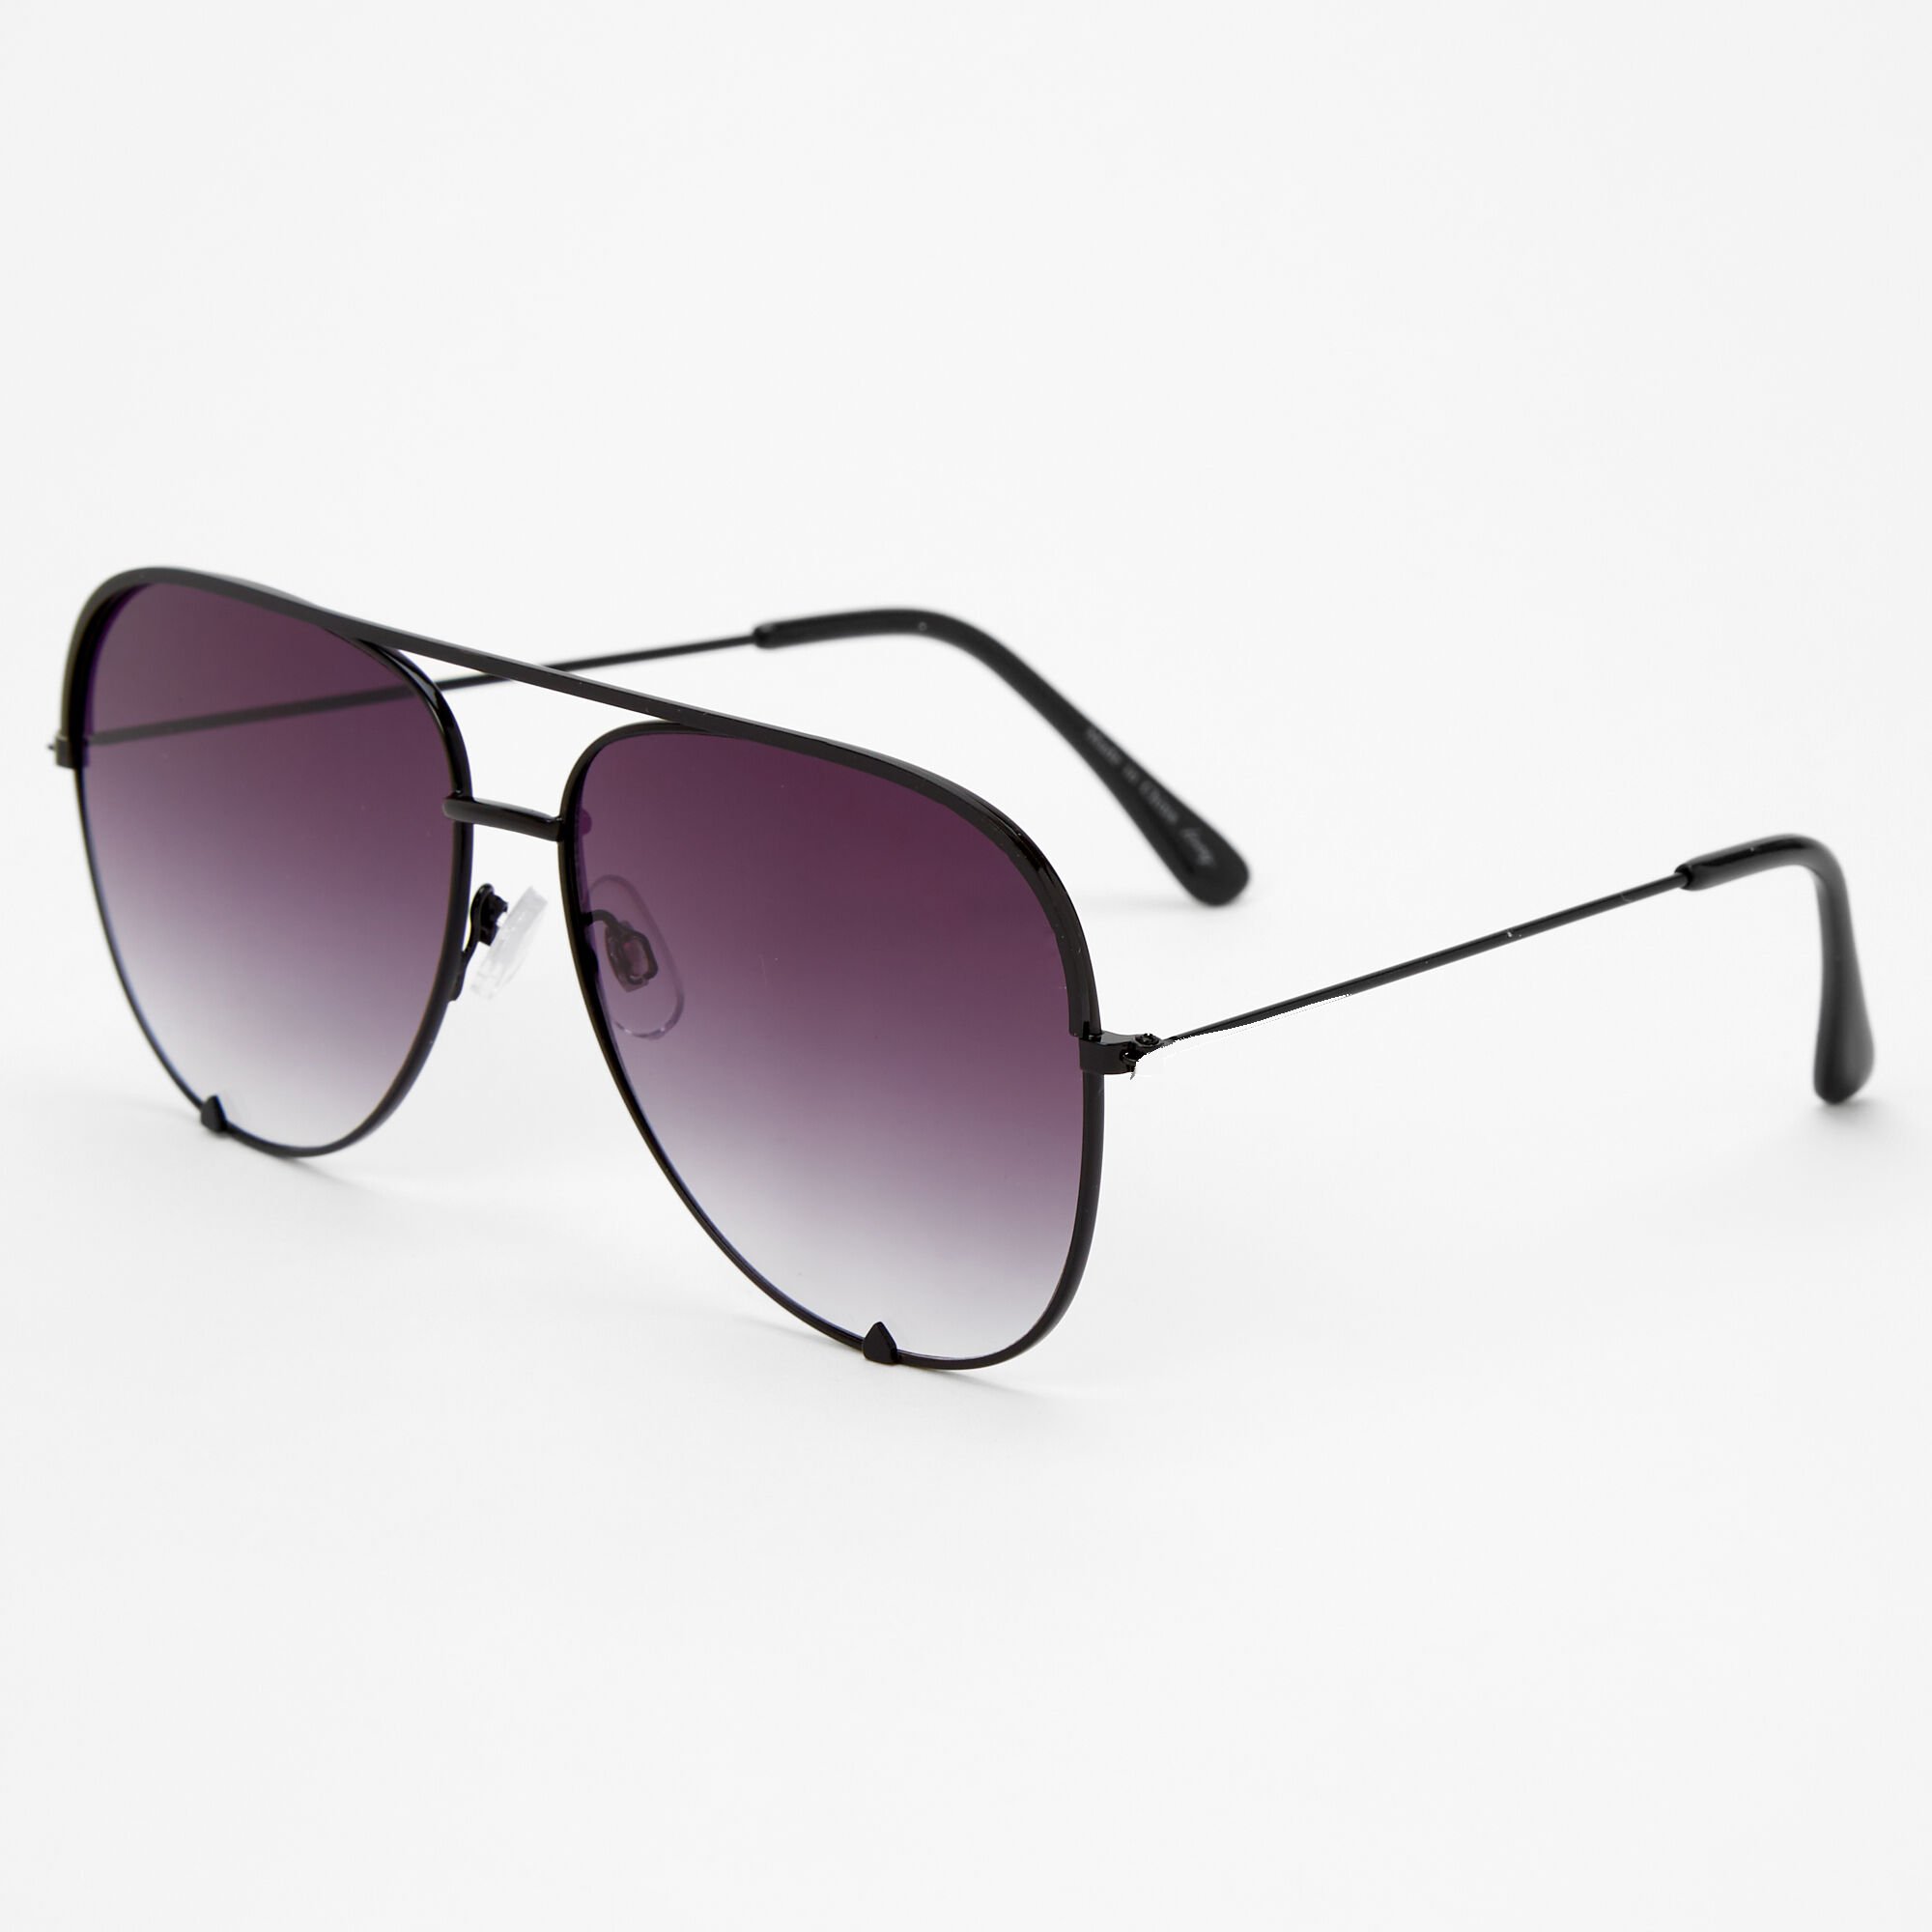 View Claires Faded Aviator Sunglasses Black information